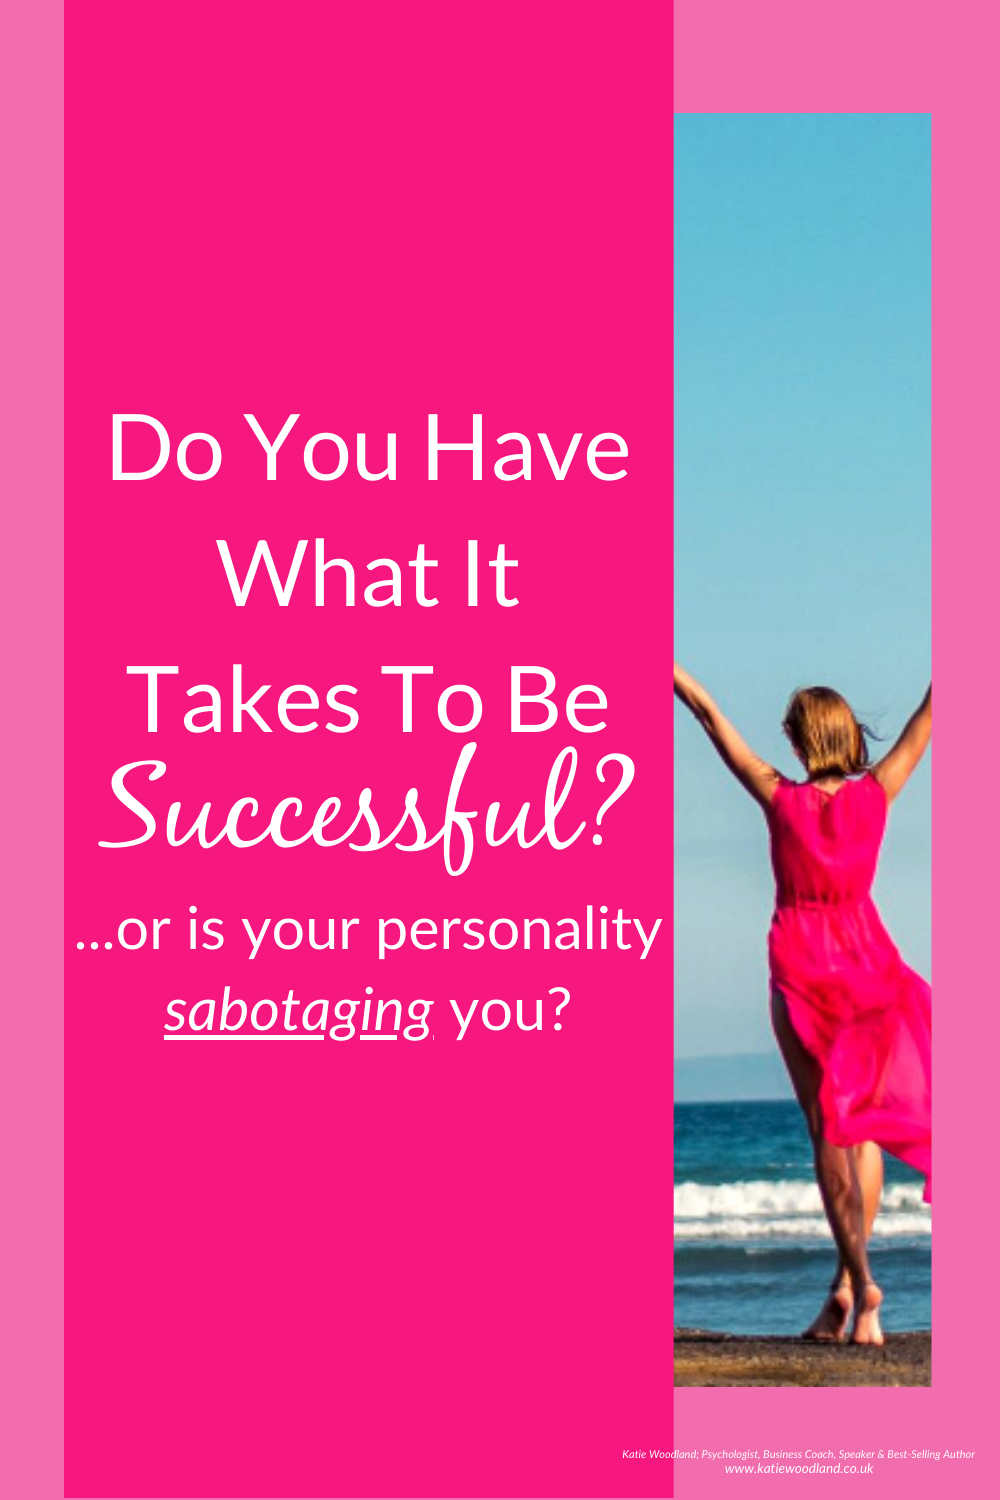 Do You Have What It Takes To Be Successful? Or Is Your Personality Sabotaging You?